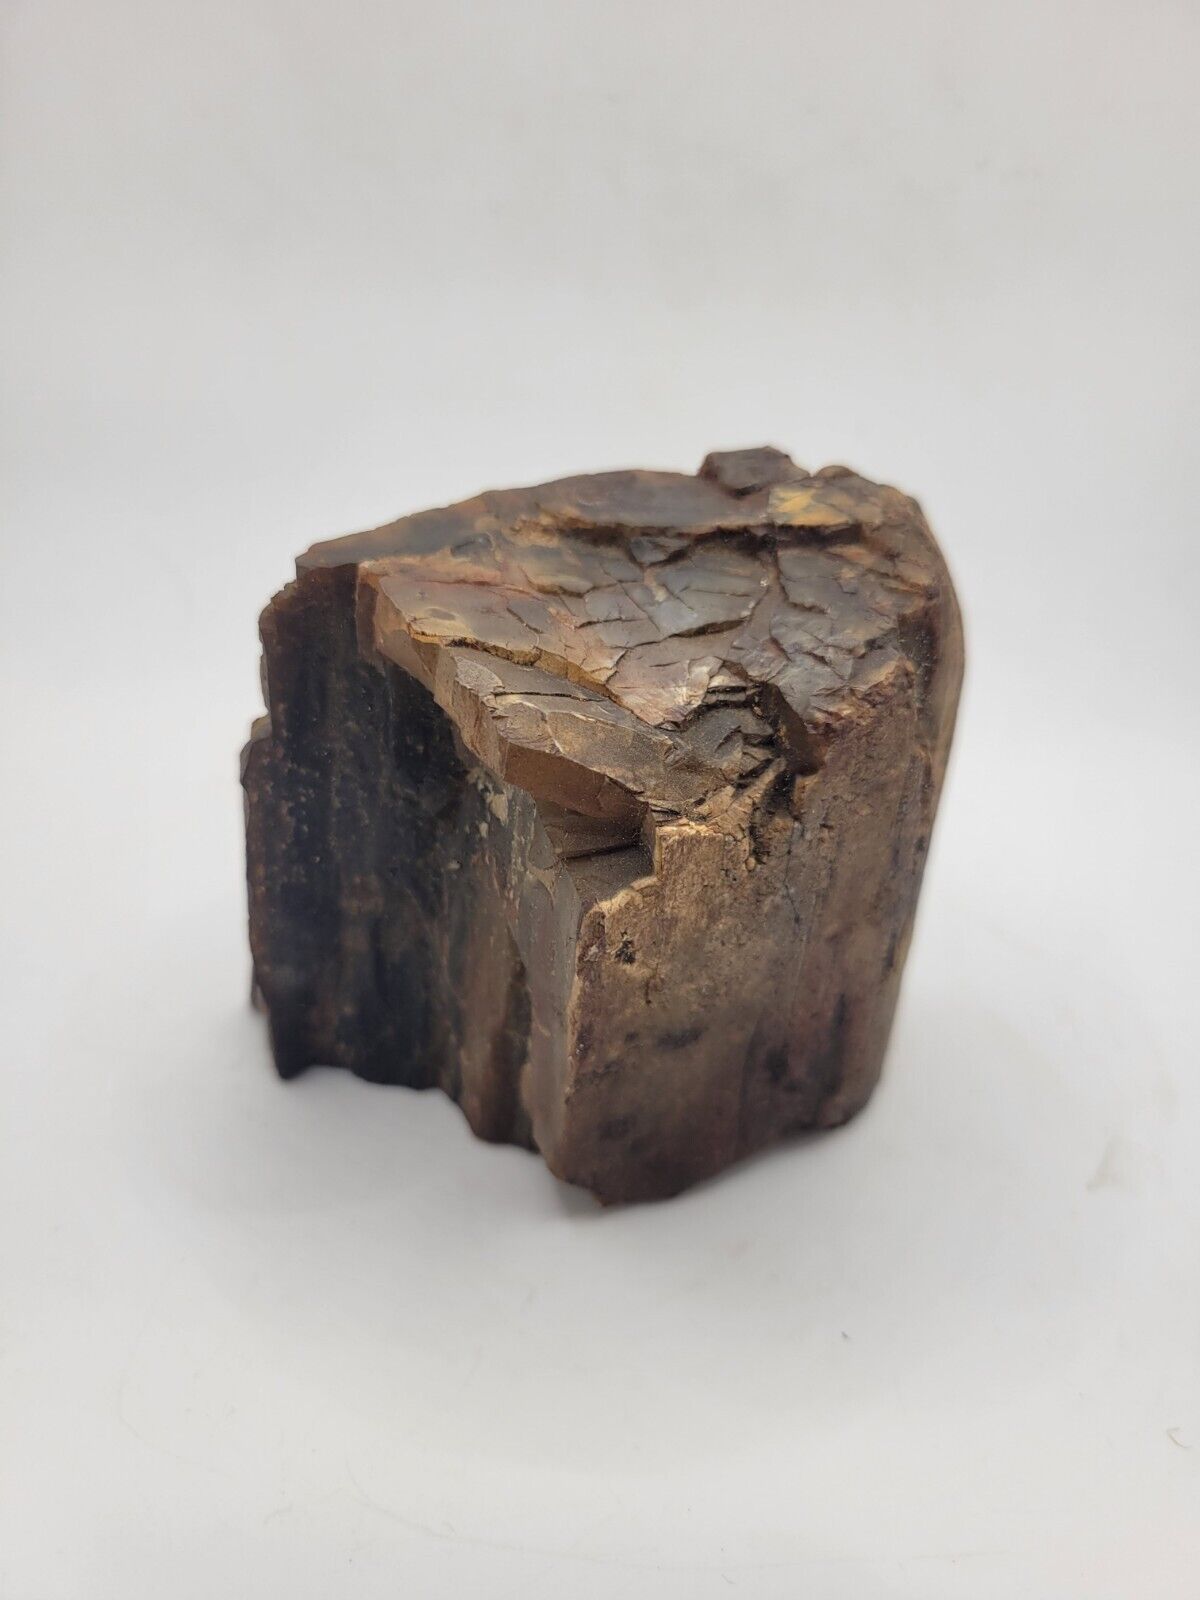 Petrified Wood Specimen Large Chunk Fossilized Smooth Display Piece 